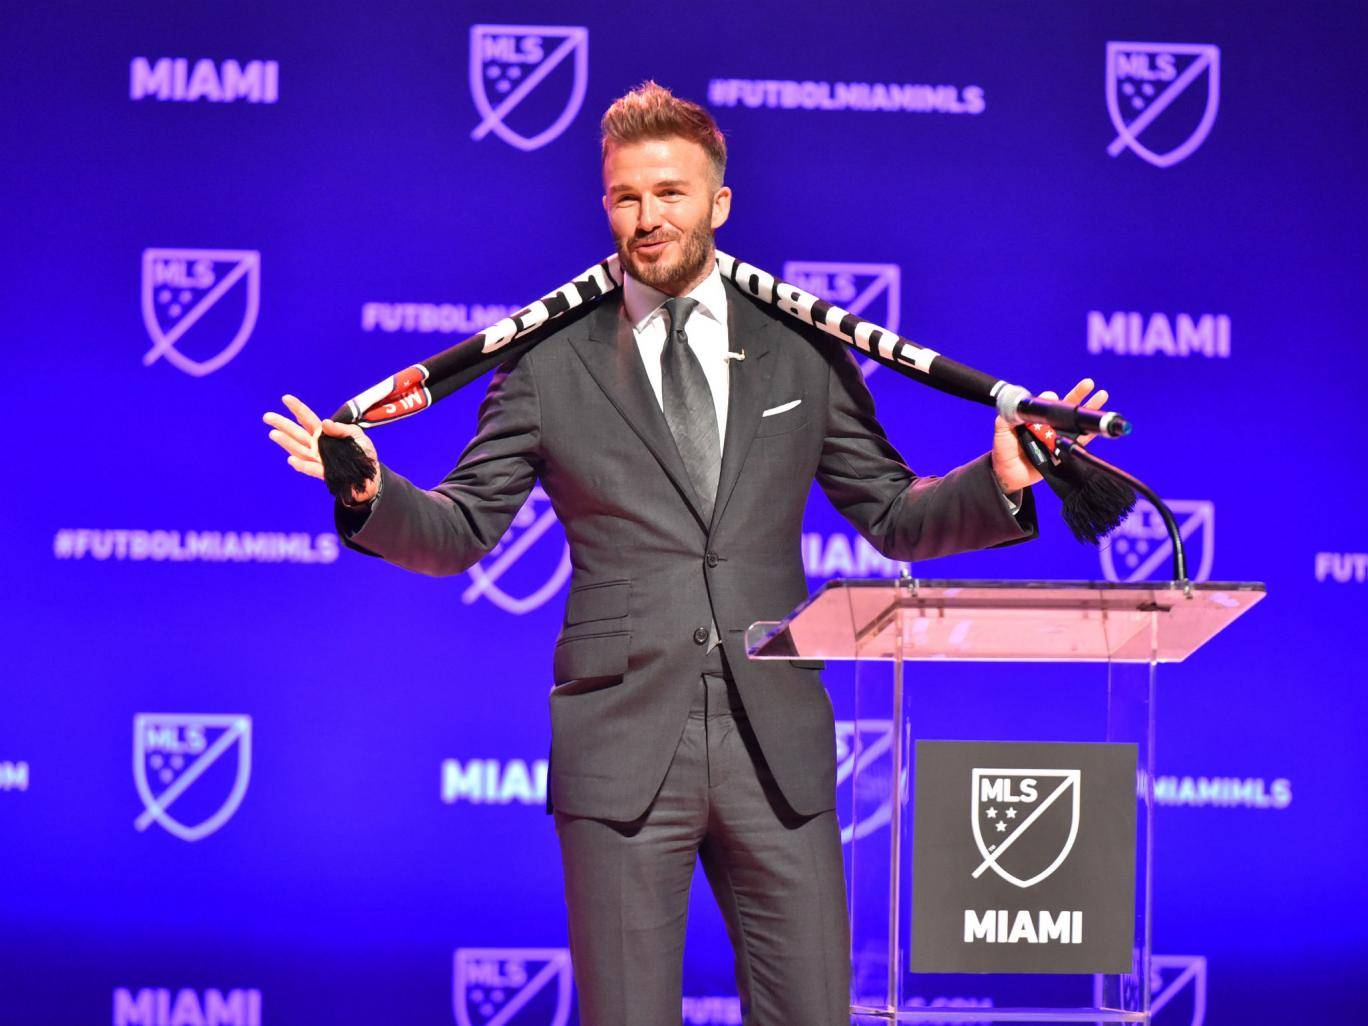 No badge, no name and no stadium but the Miami dream is alive for David Beckham as he talks signings